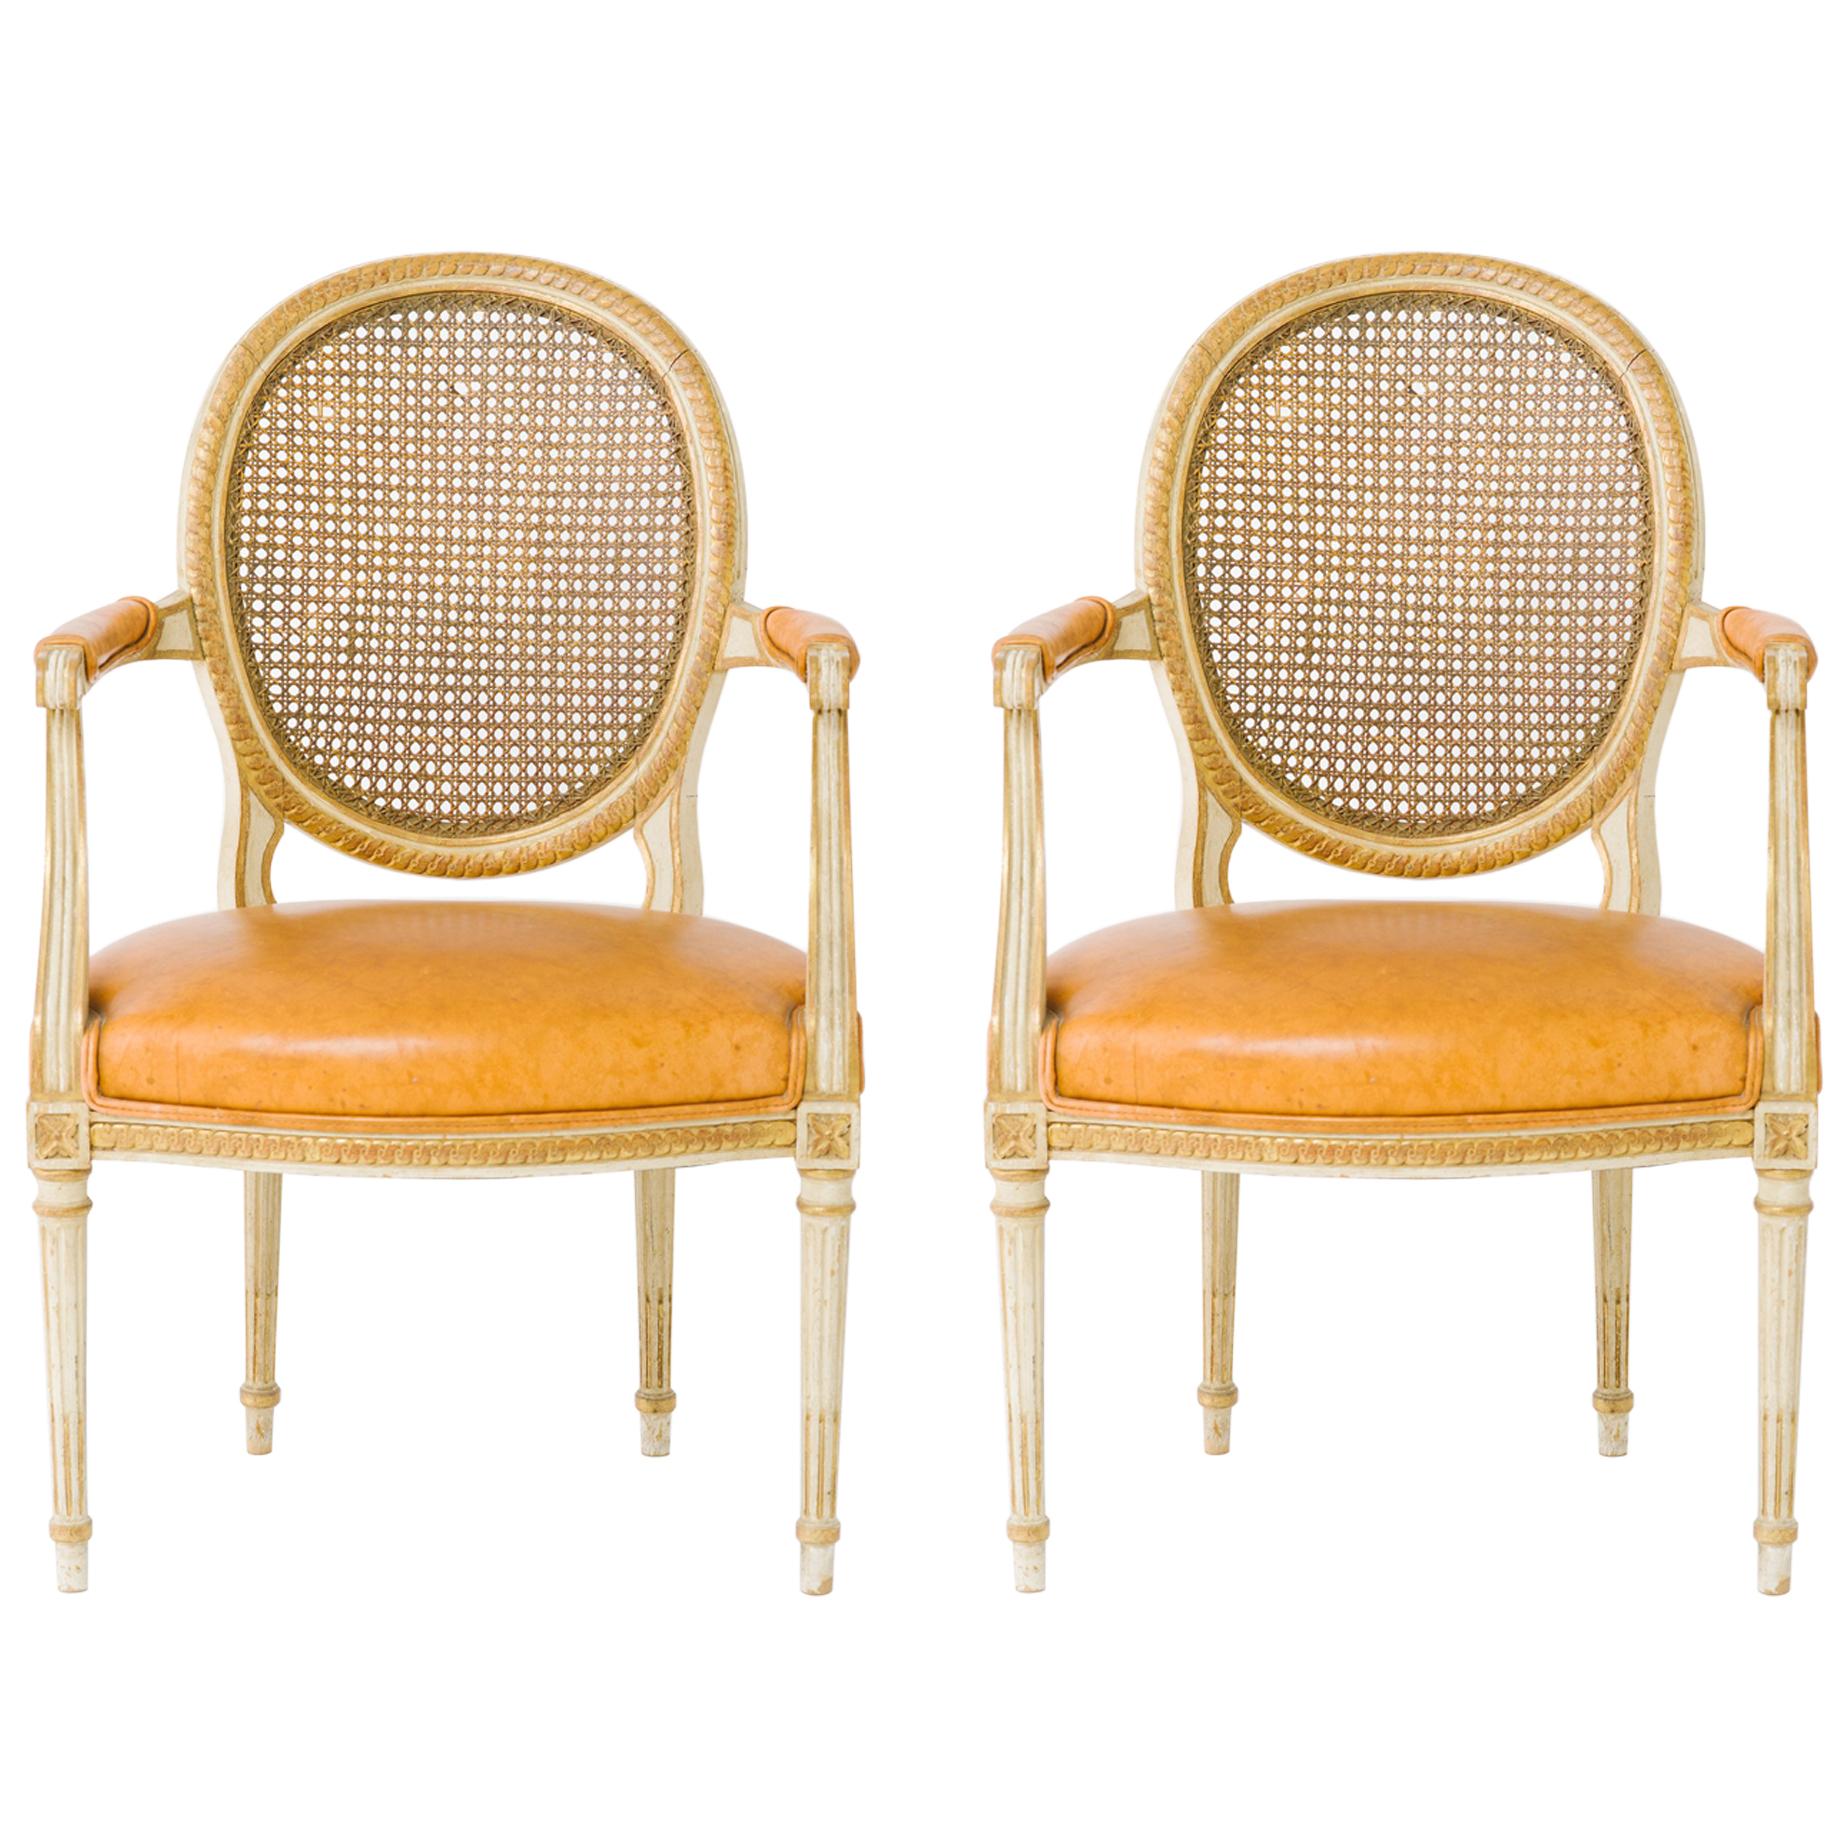 Pair of 1940s Louis XVI Canedback Armchairs with Leather Seats